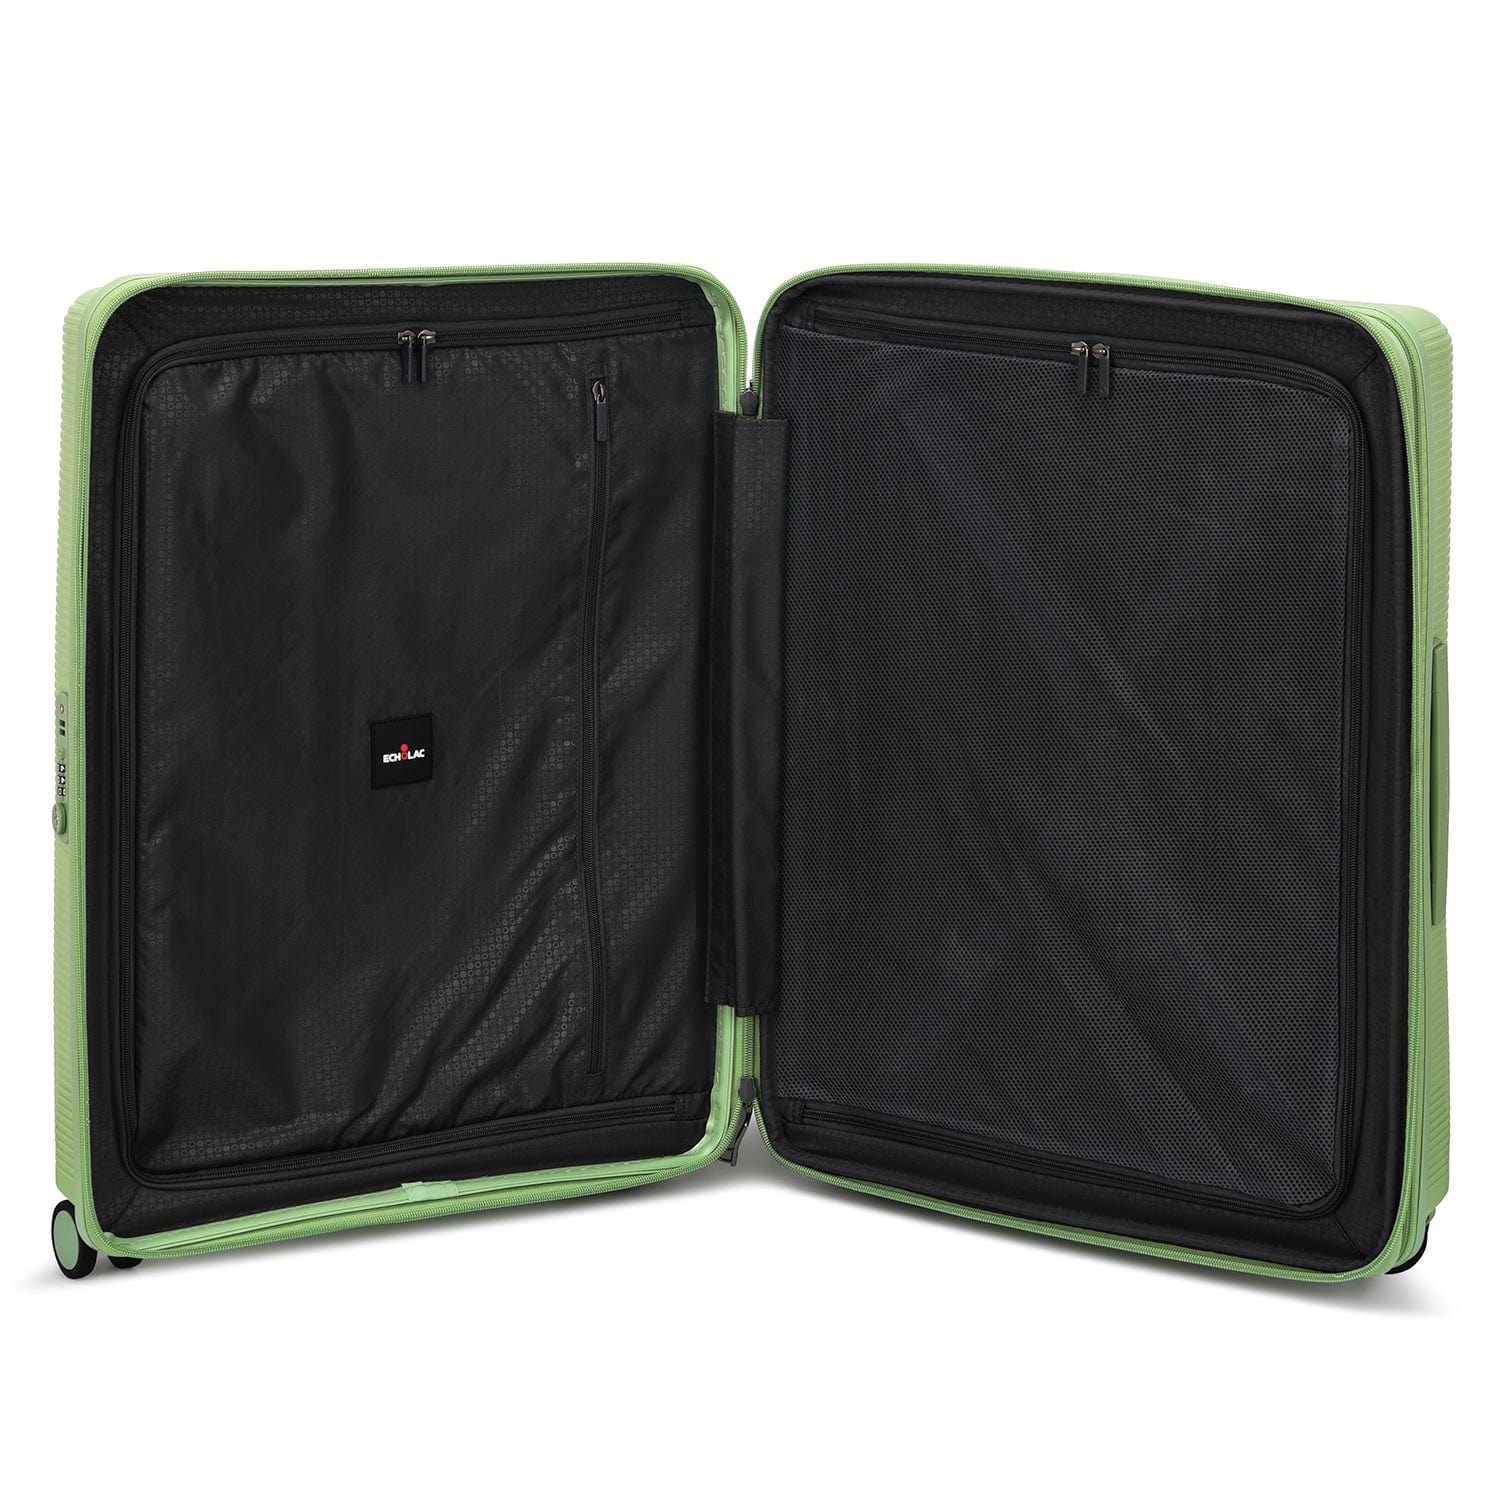 Echolac Forza 55+65+75cm Hardcase 4 Double Wheel Expandable Cabin & Check-In Luggage Trolley Set Reef Green